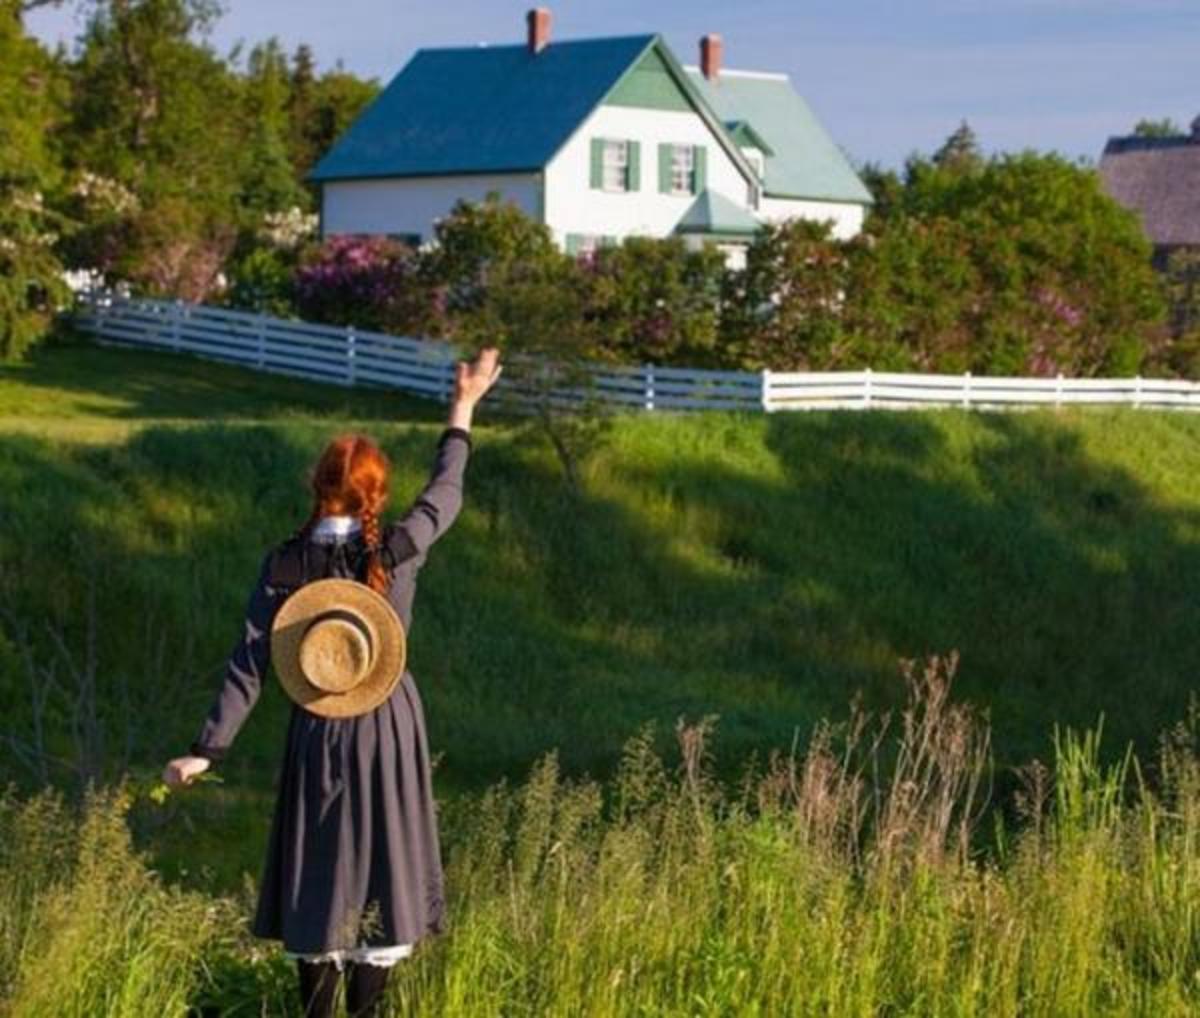 A scene from a film adaptation of "Anne of Green Gables" 